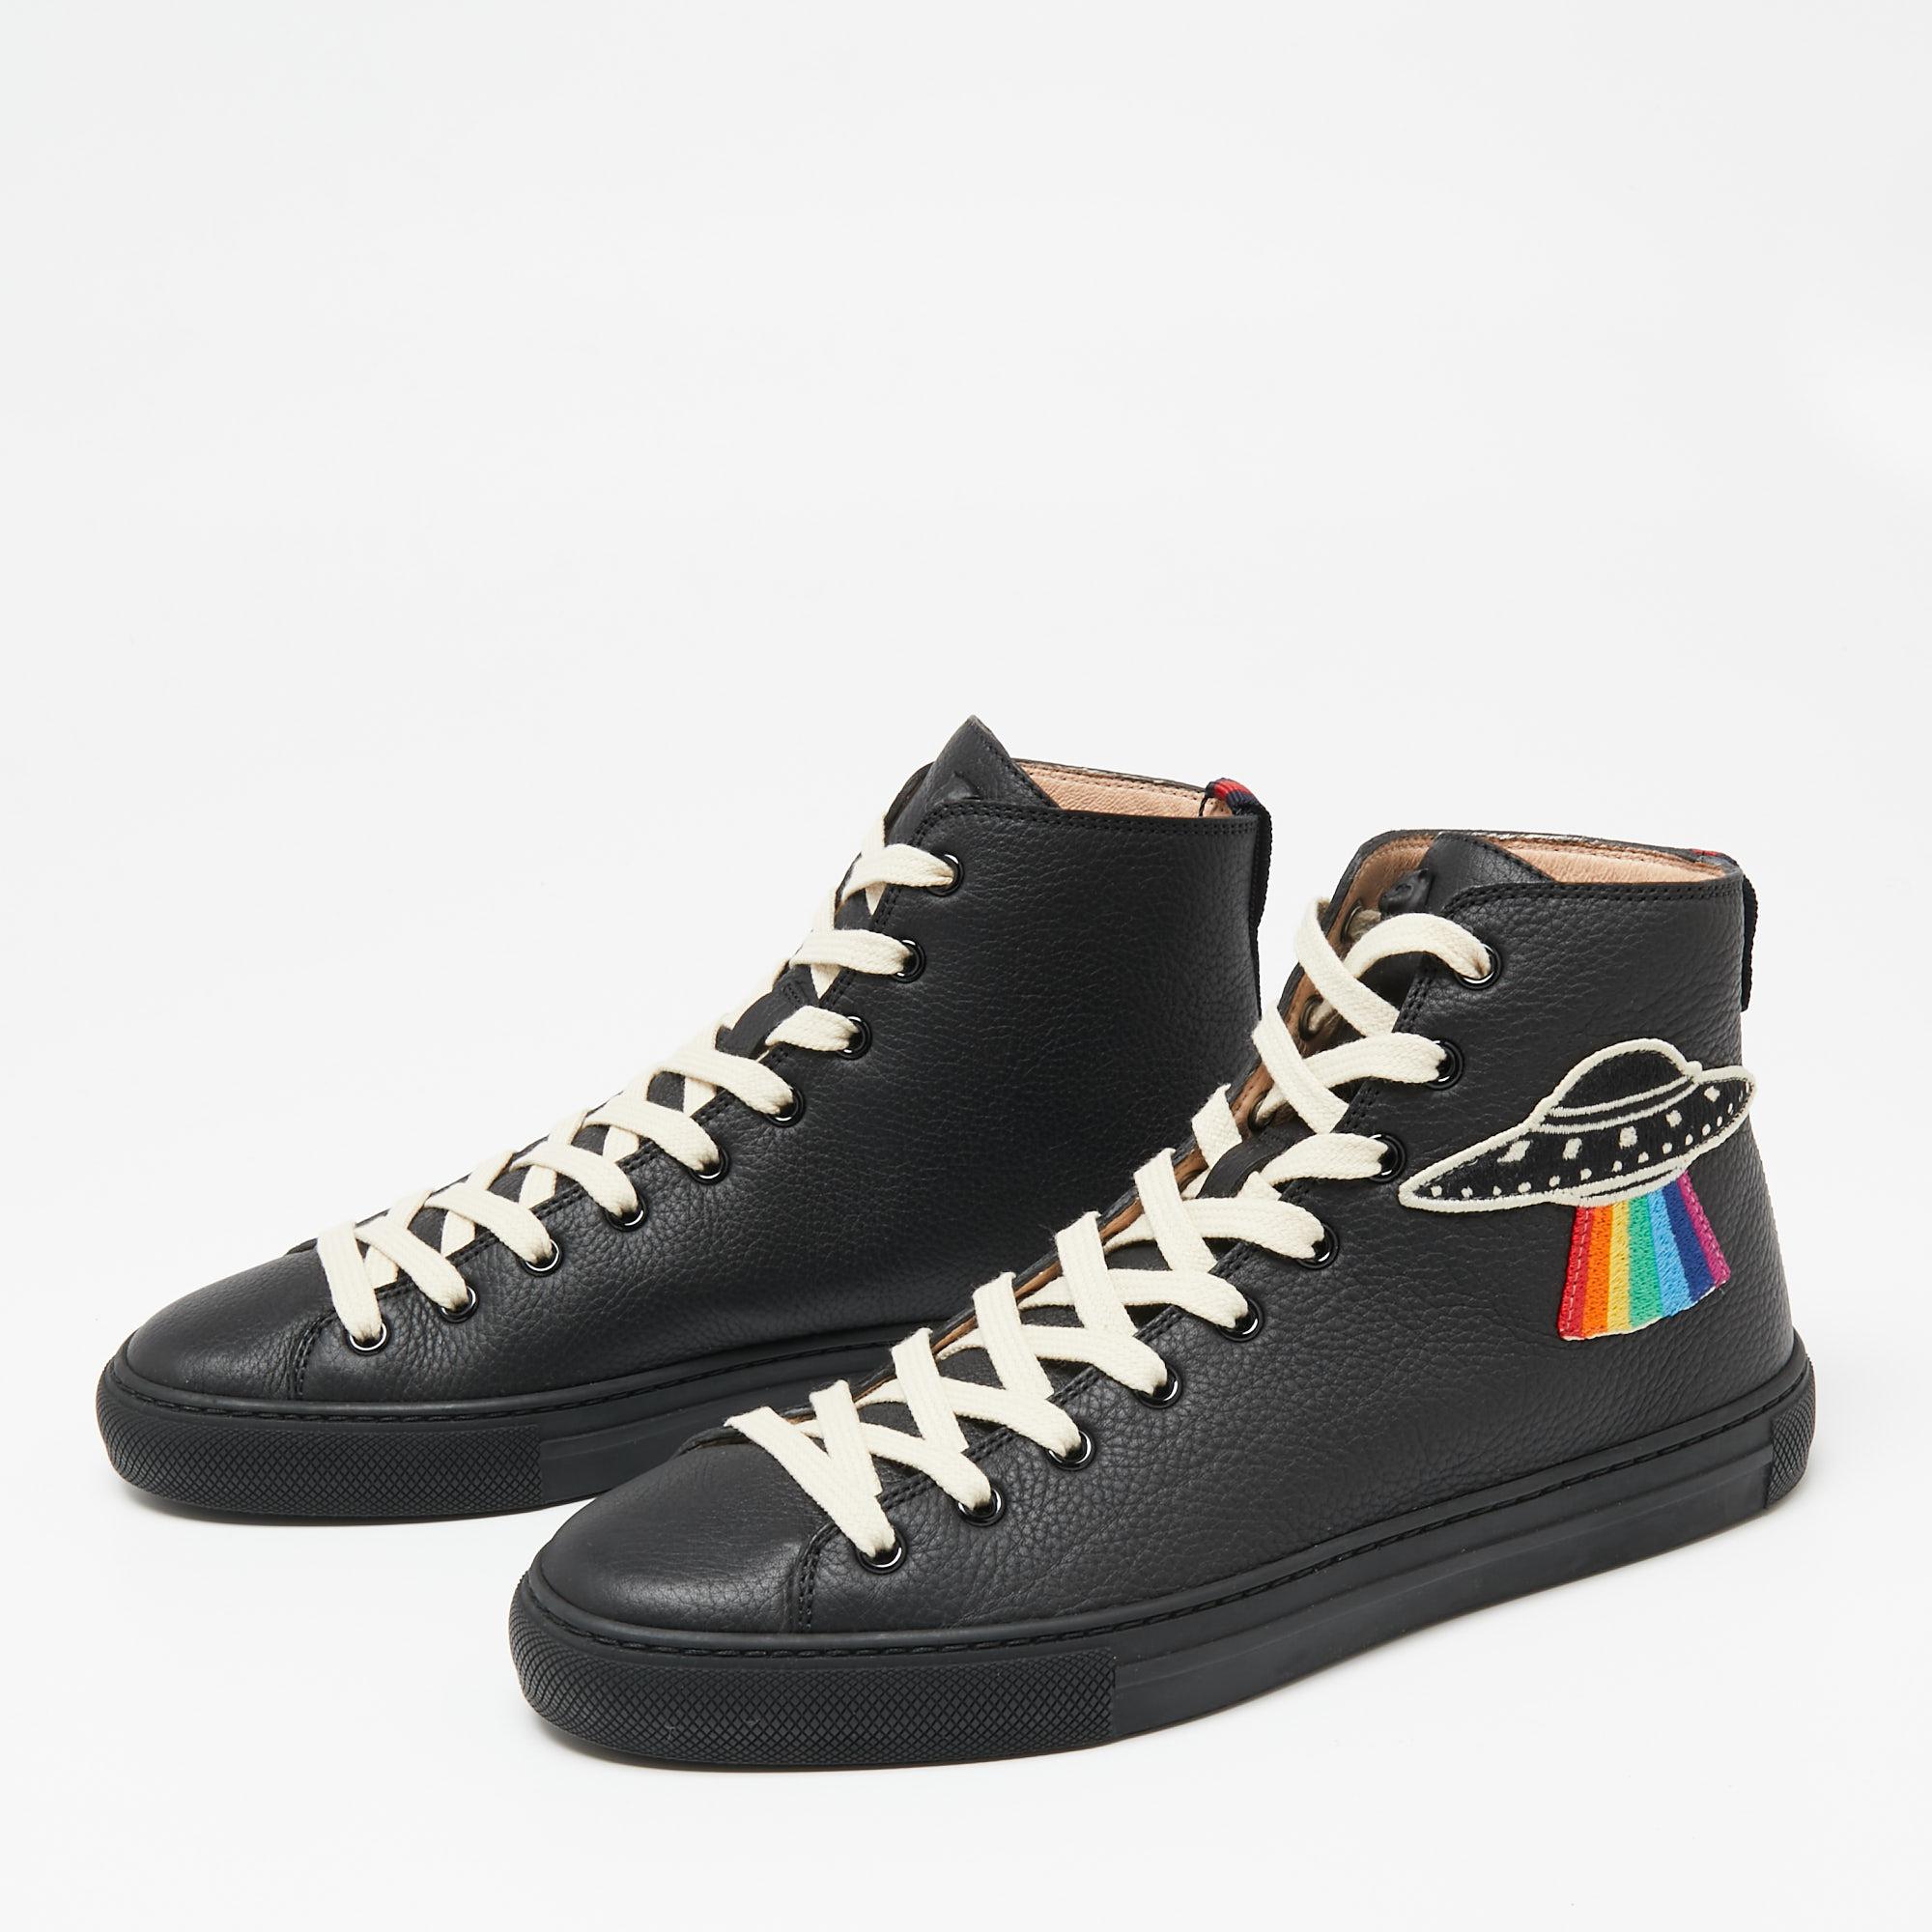 Gucci Black Leather High-Top Sneakers Size 40 1